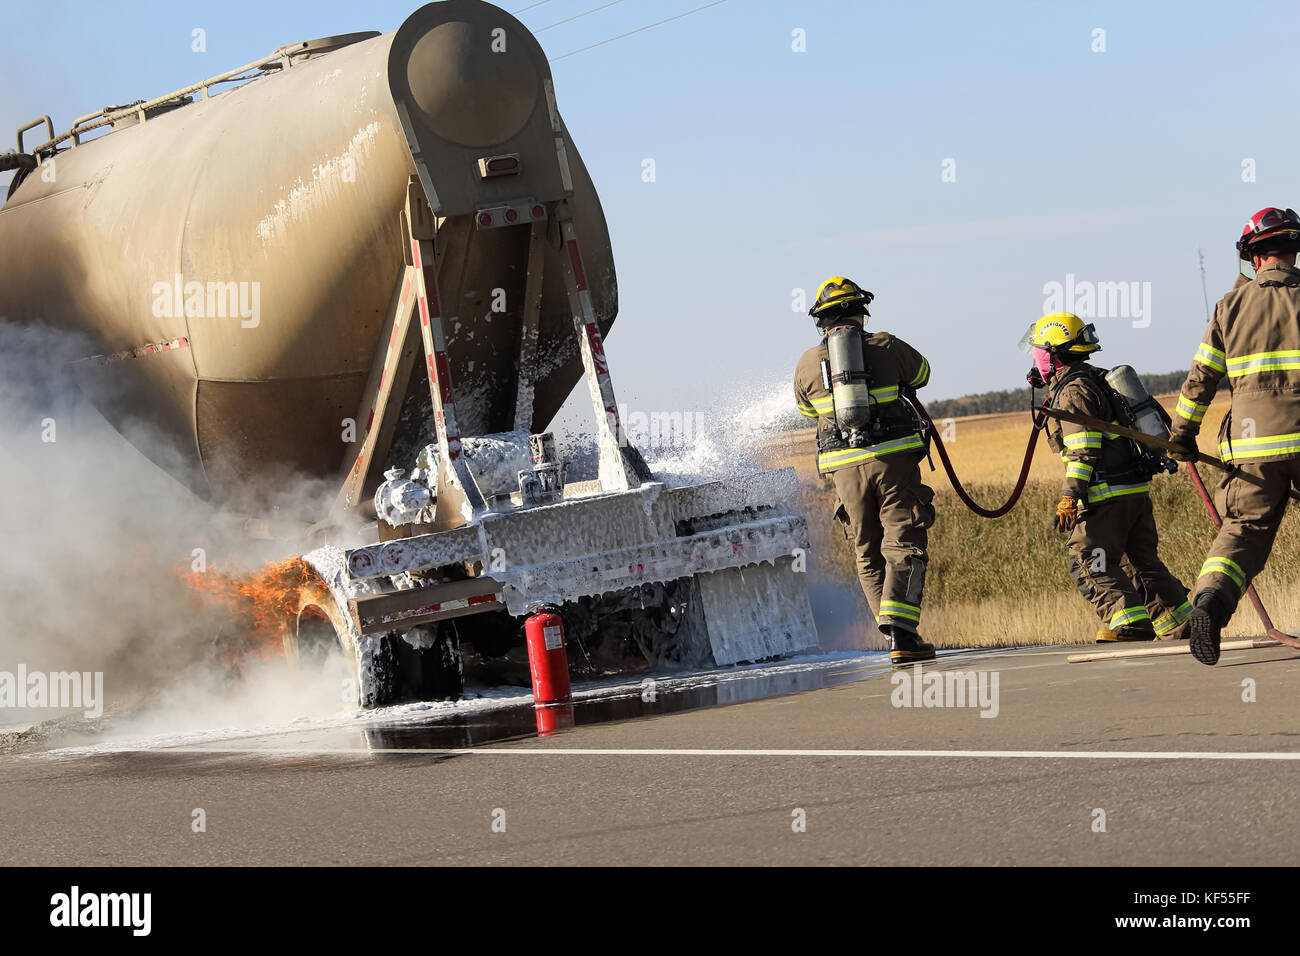 Three fireman rush to put out a brake fire on a semi-truck. Stock Photo